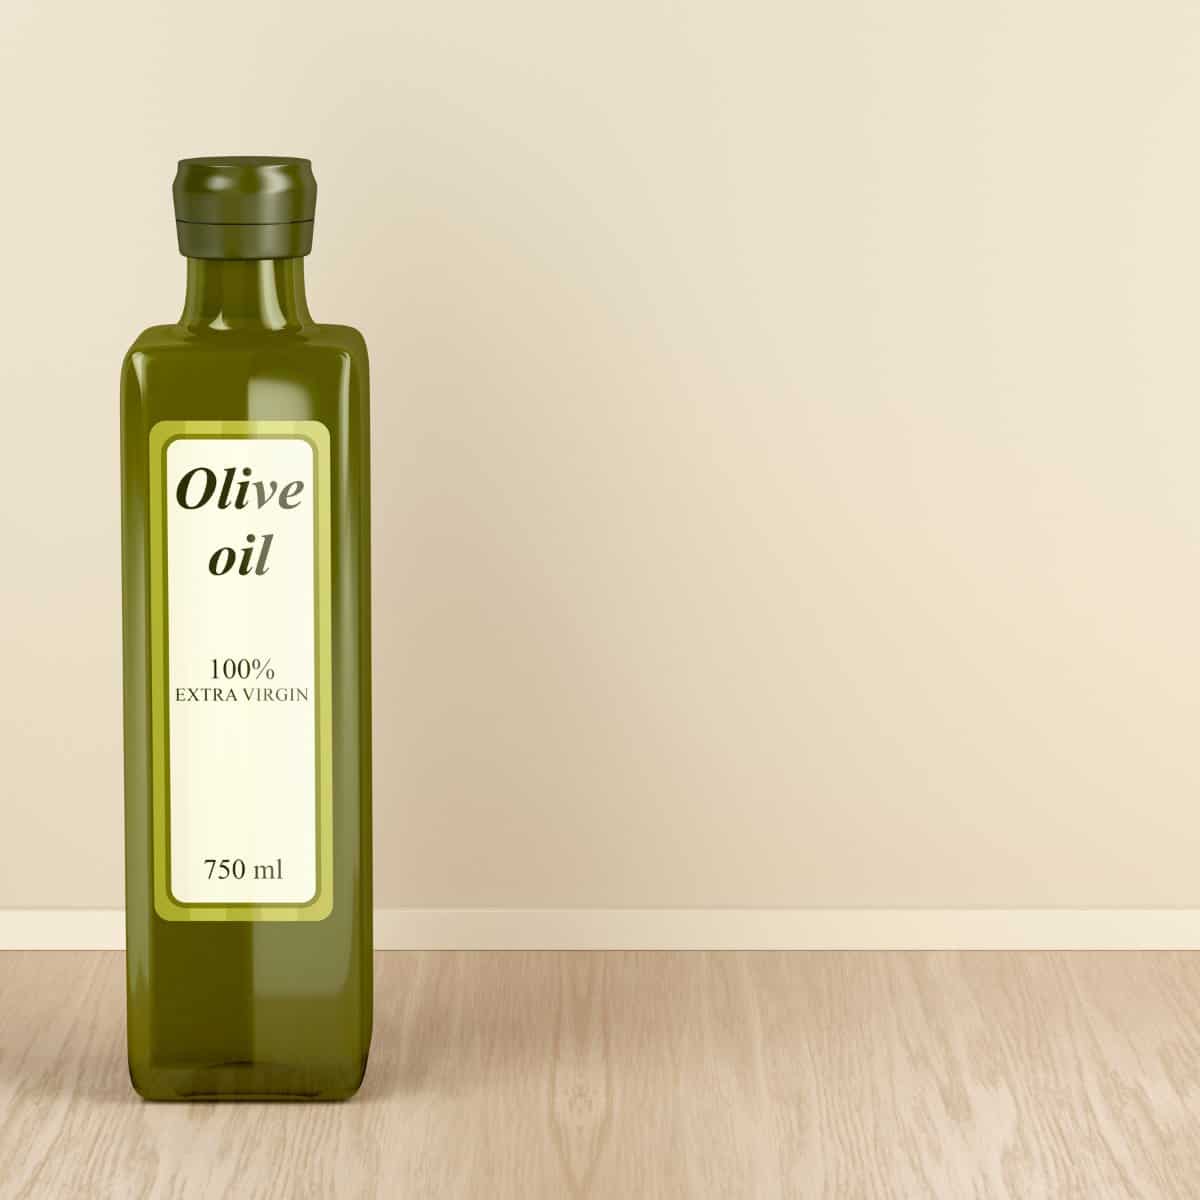 What is extra virgin olive oil